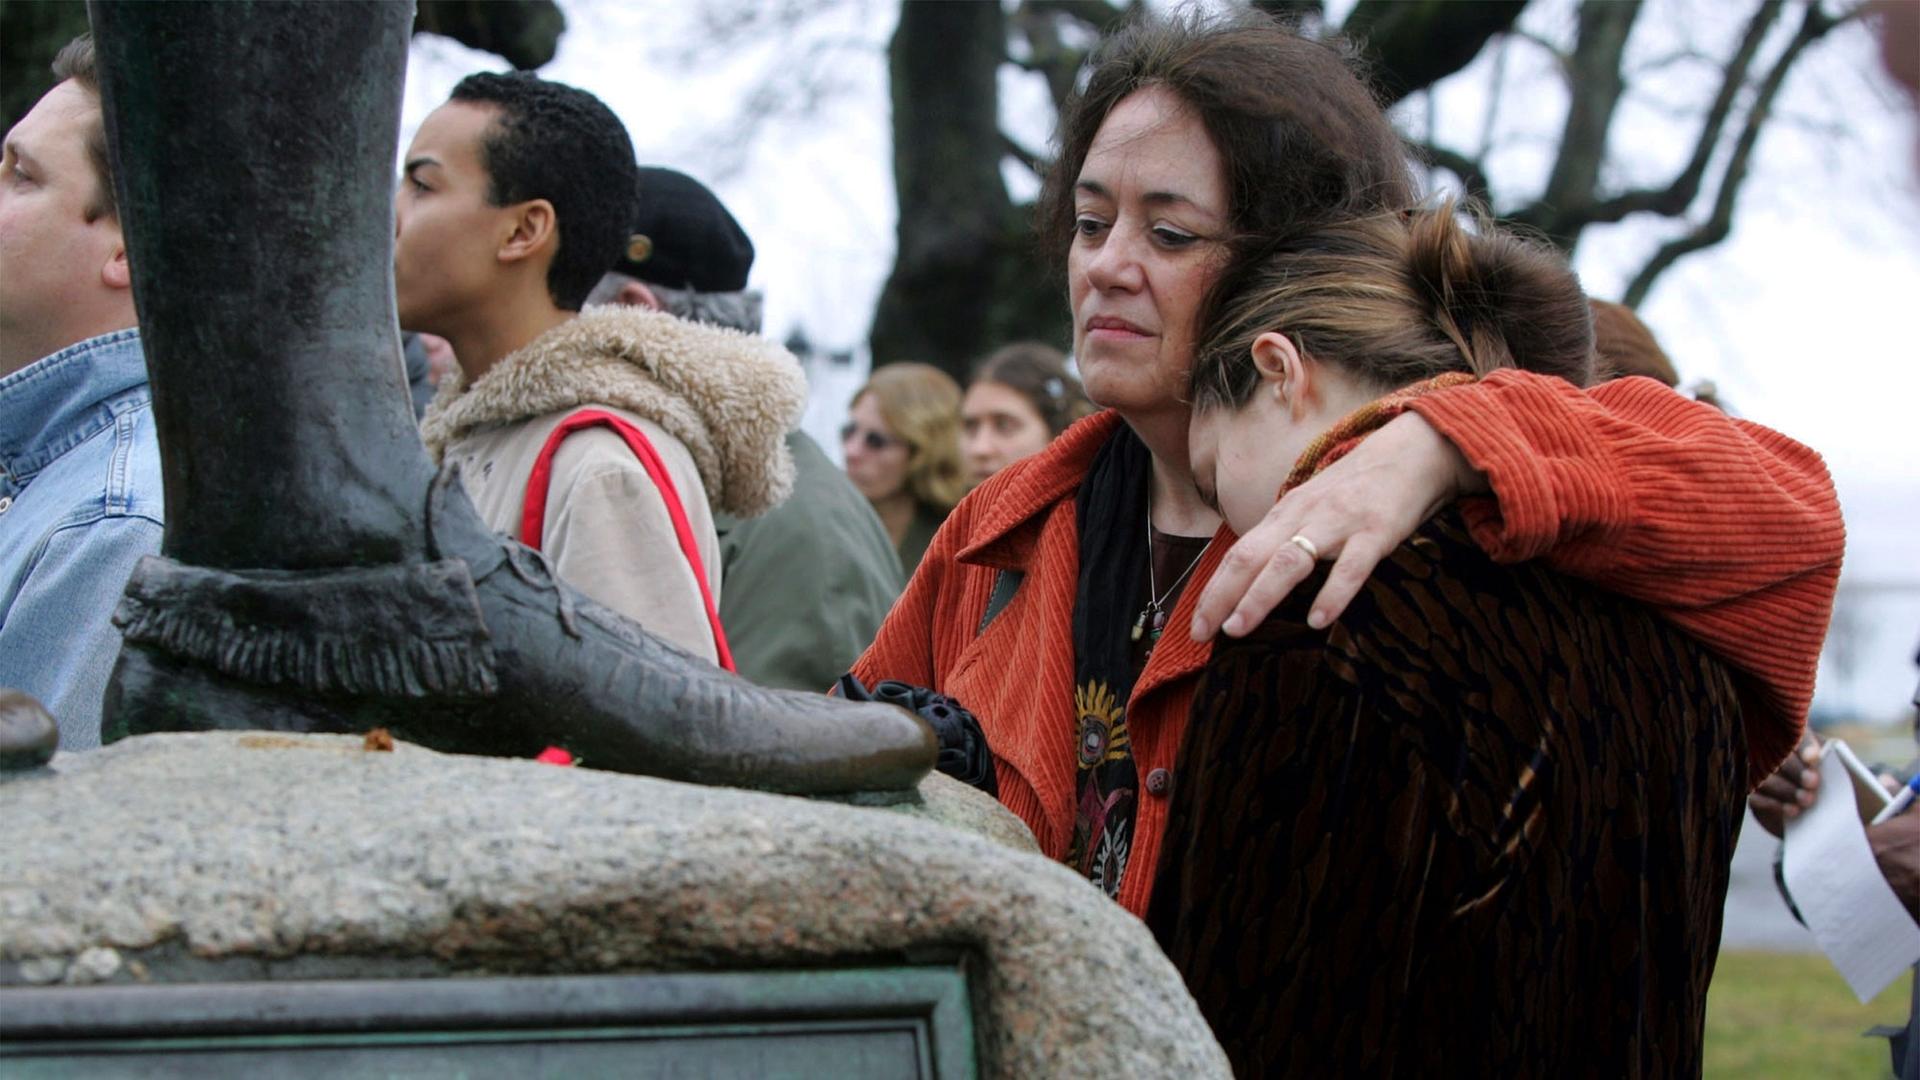 Native American supporter Deborah Theodore, left, of Belmont, Mass., and her daughter, Sofia Theodore-Pierce stand by the statue of Massasoit on Cole's Hill in Plymouth, Mass., during the 35th National Day of Mourning, Nov. 25, 2004.